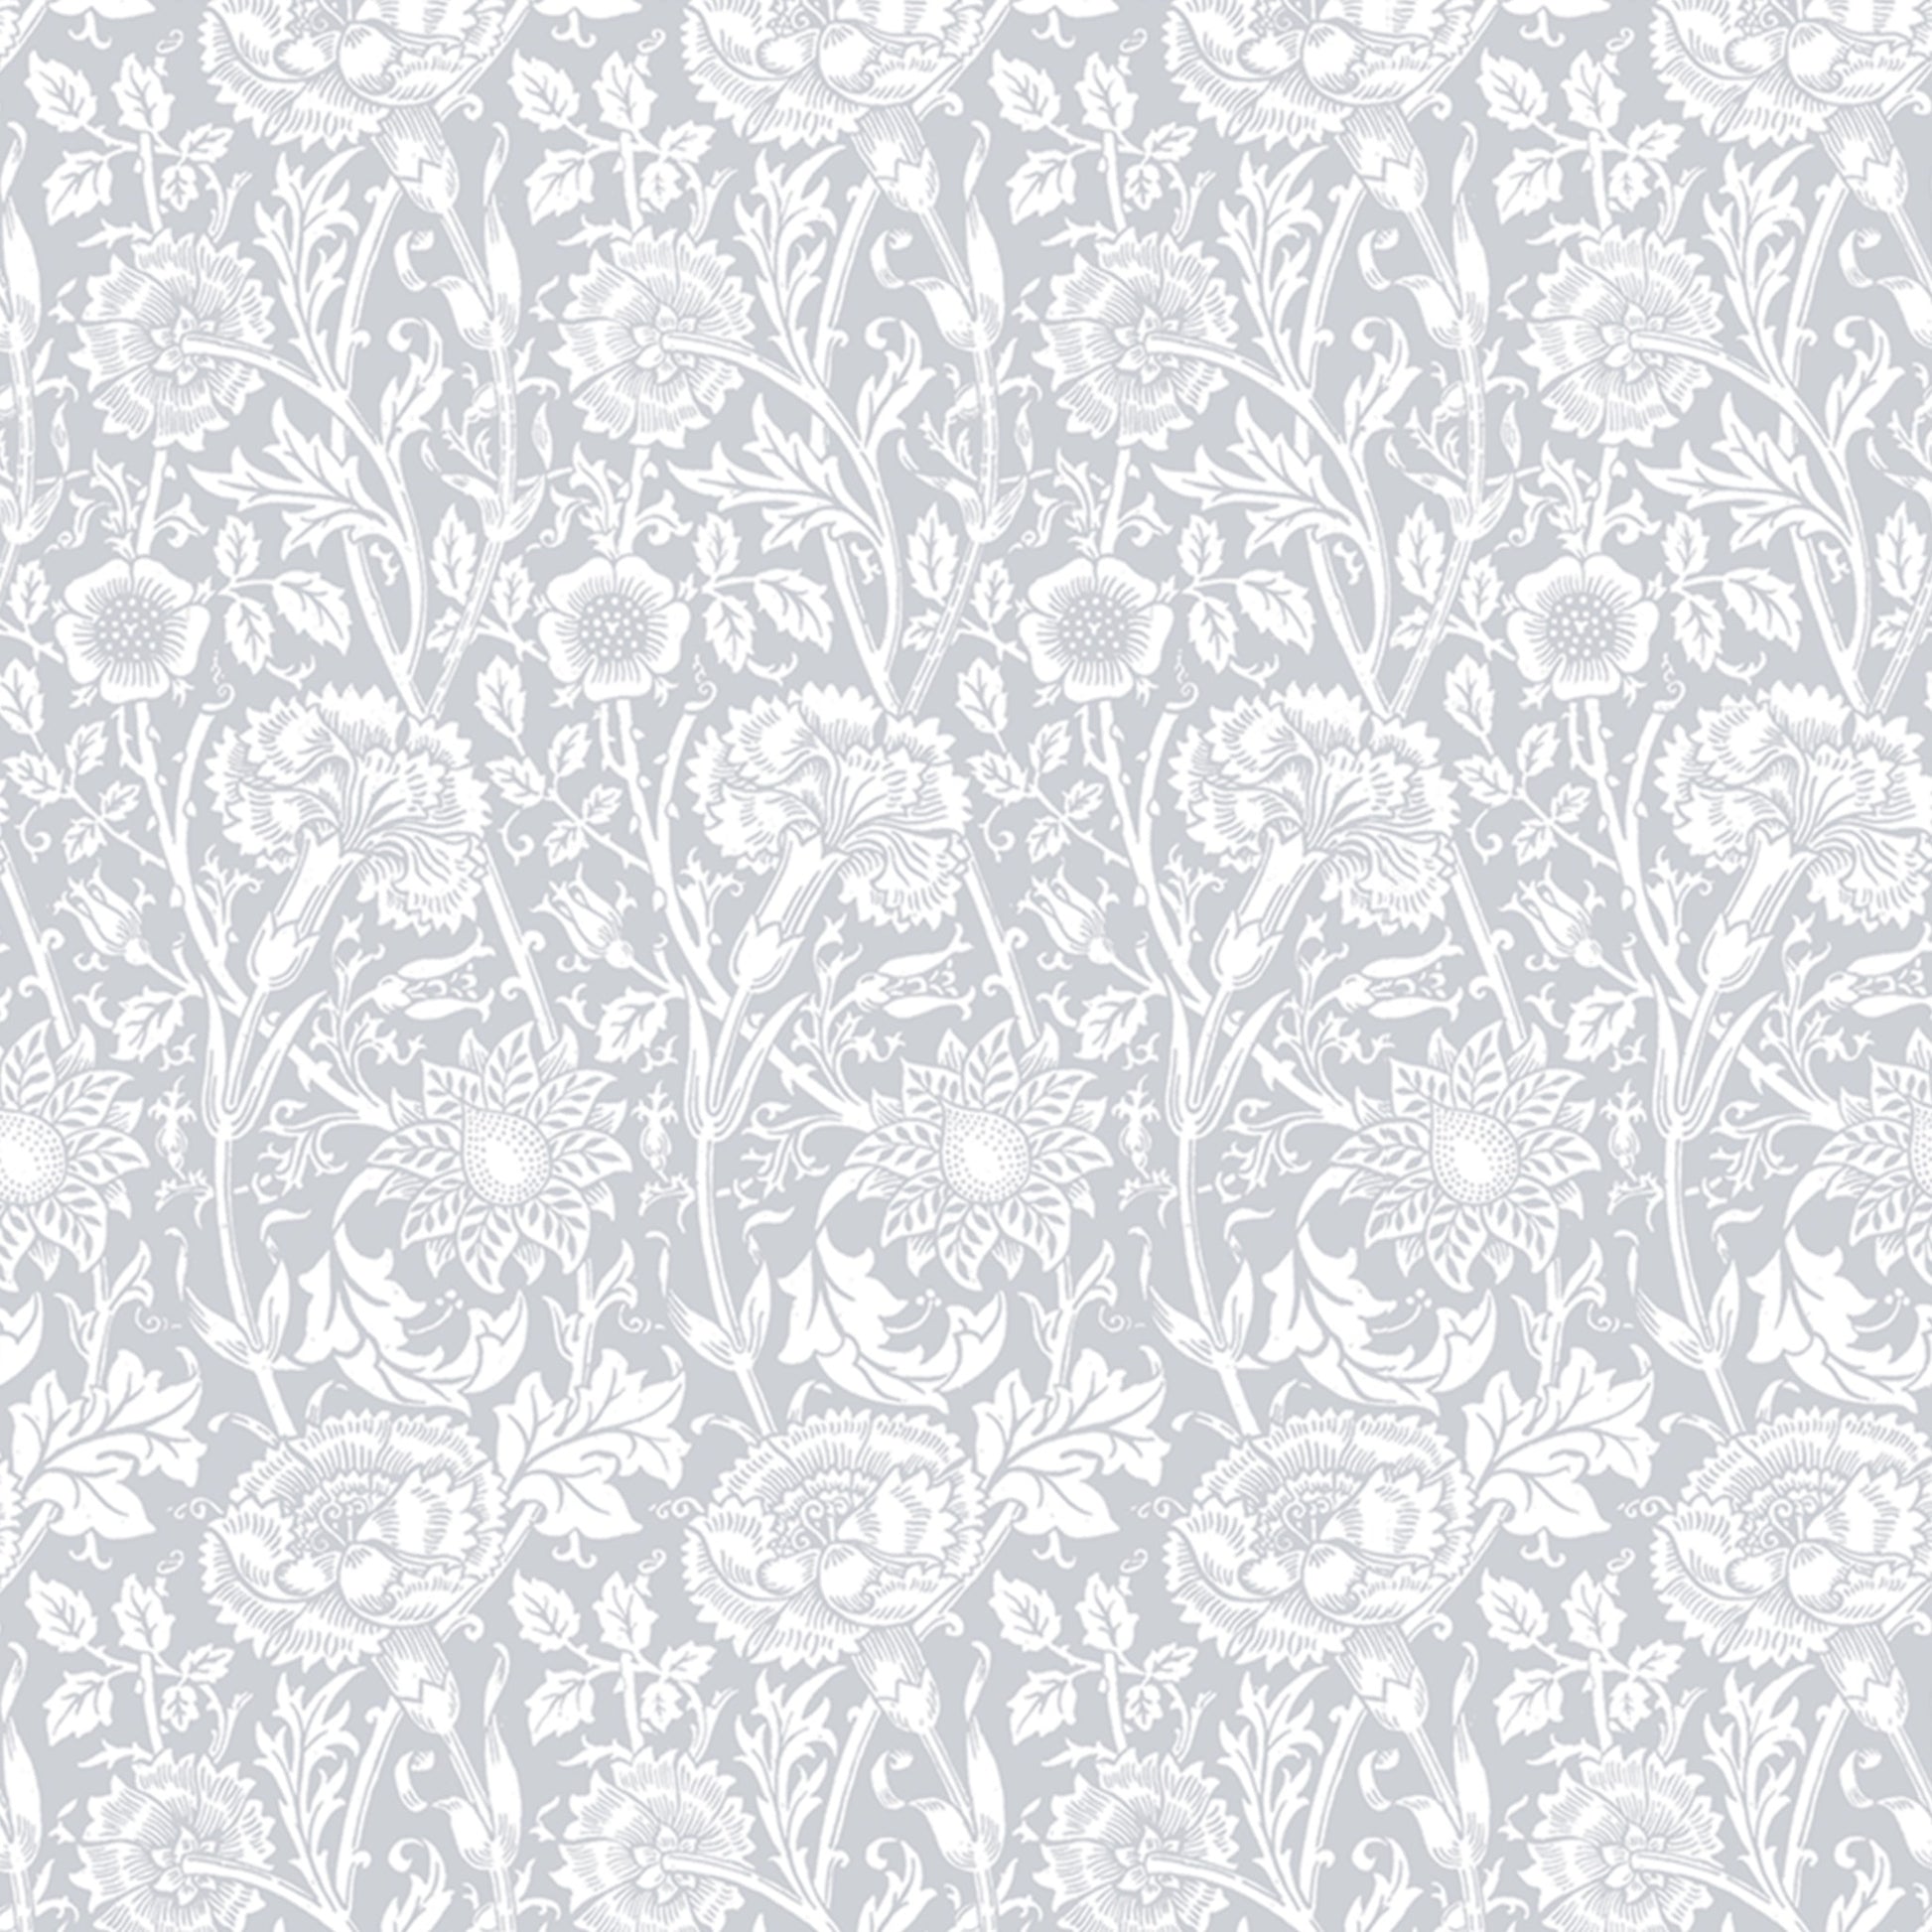 Simply Drawer Liners LILY OF THE VALLEY fragrance SCENTED Drawer Liners in GREY William Morris Design. Made in Britain.